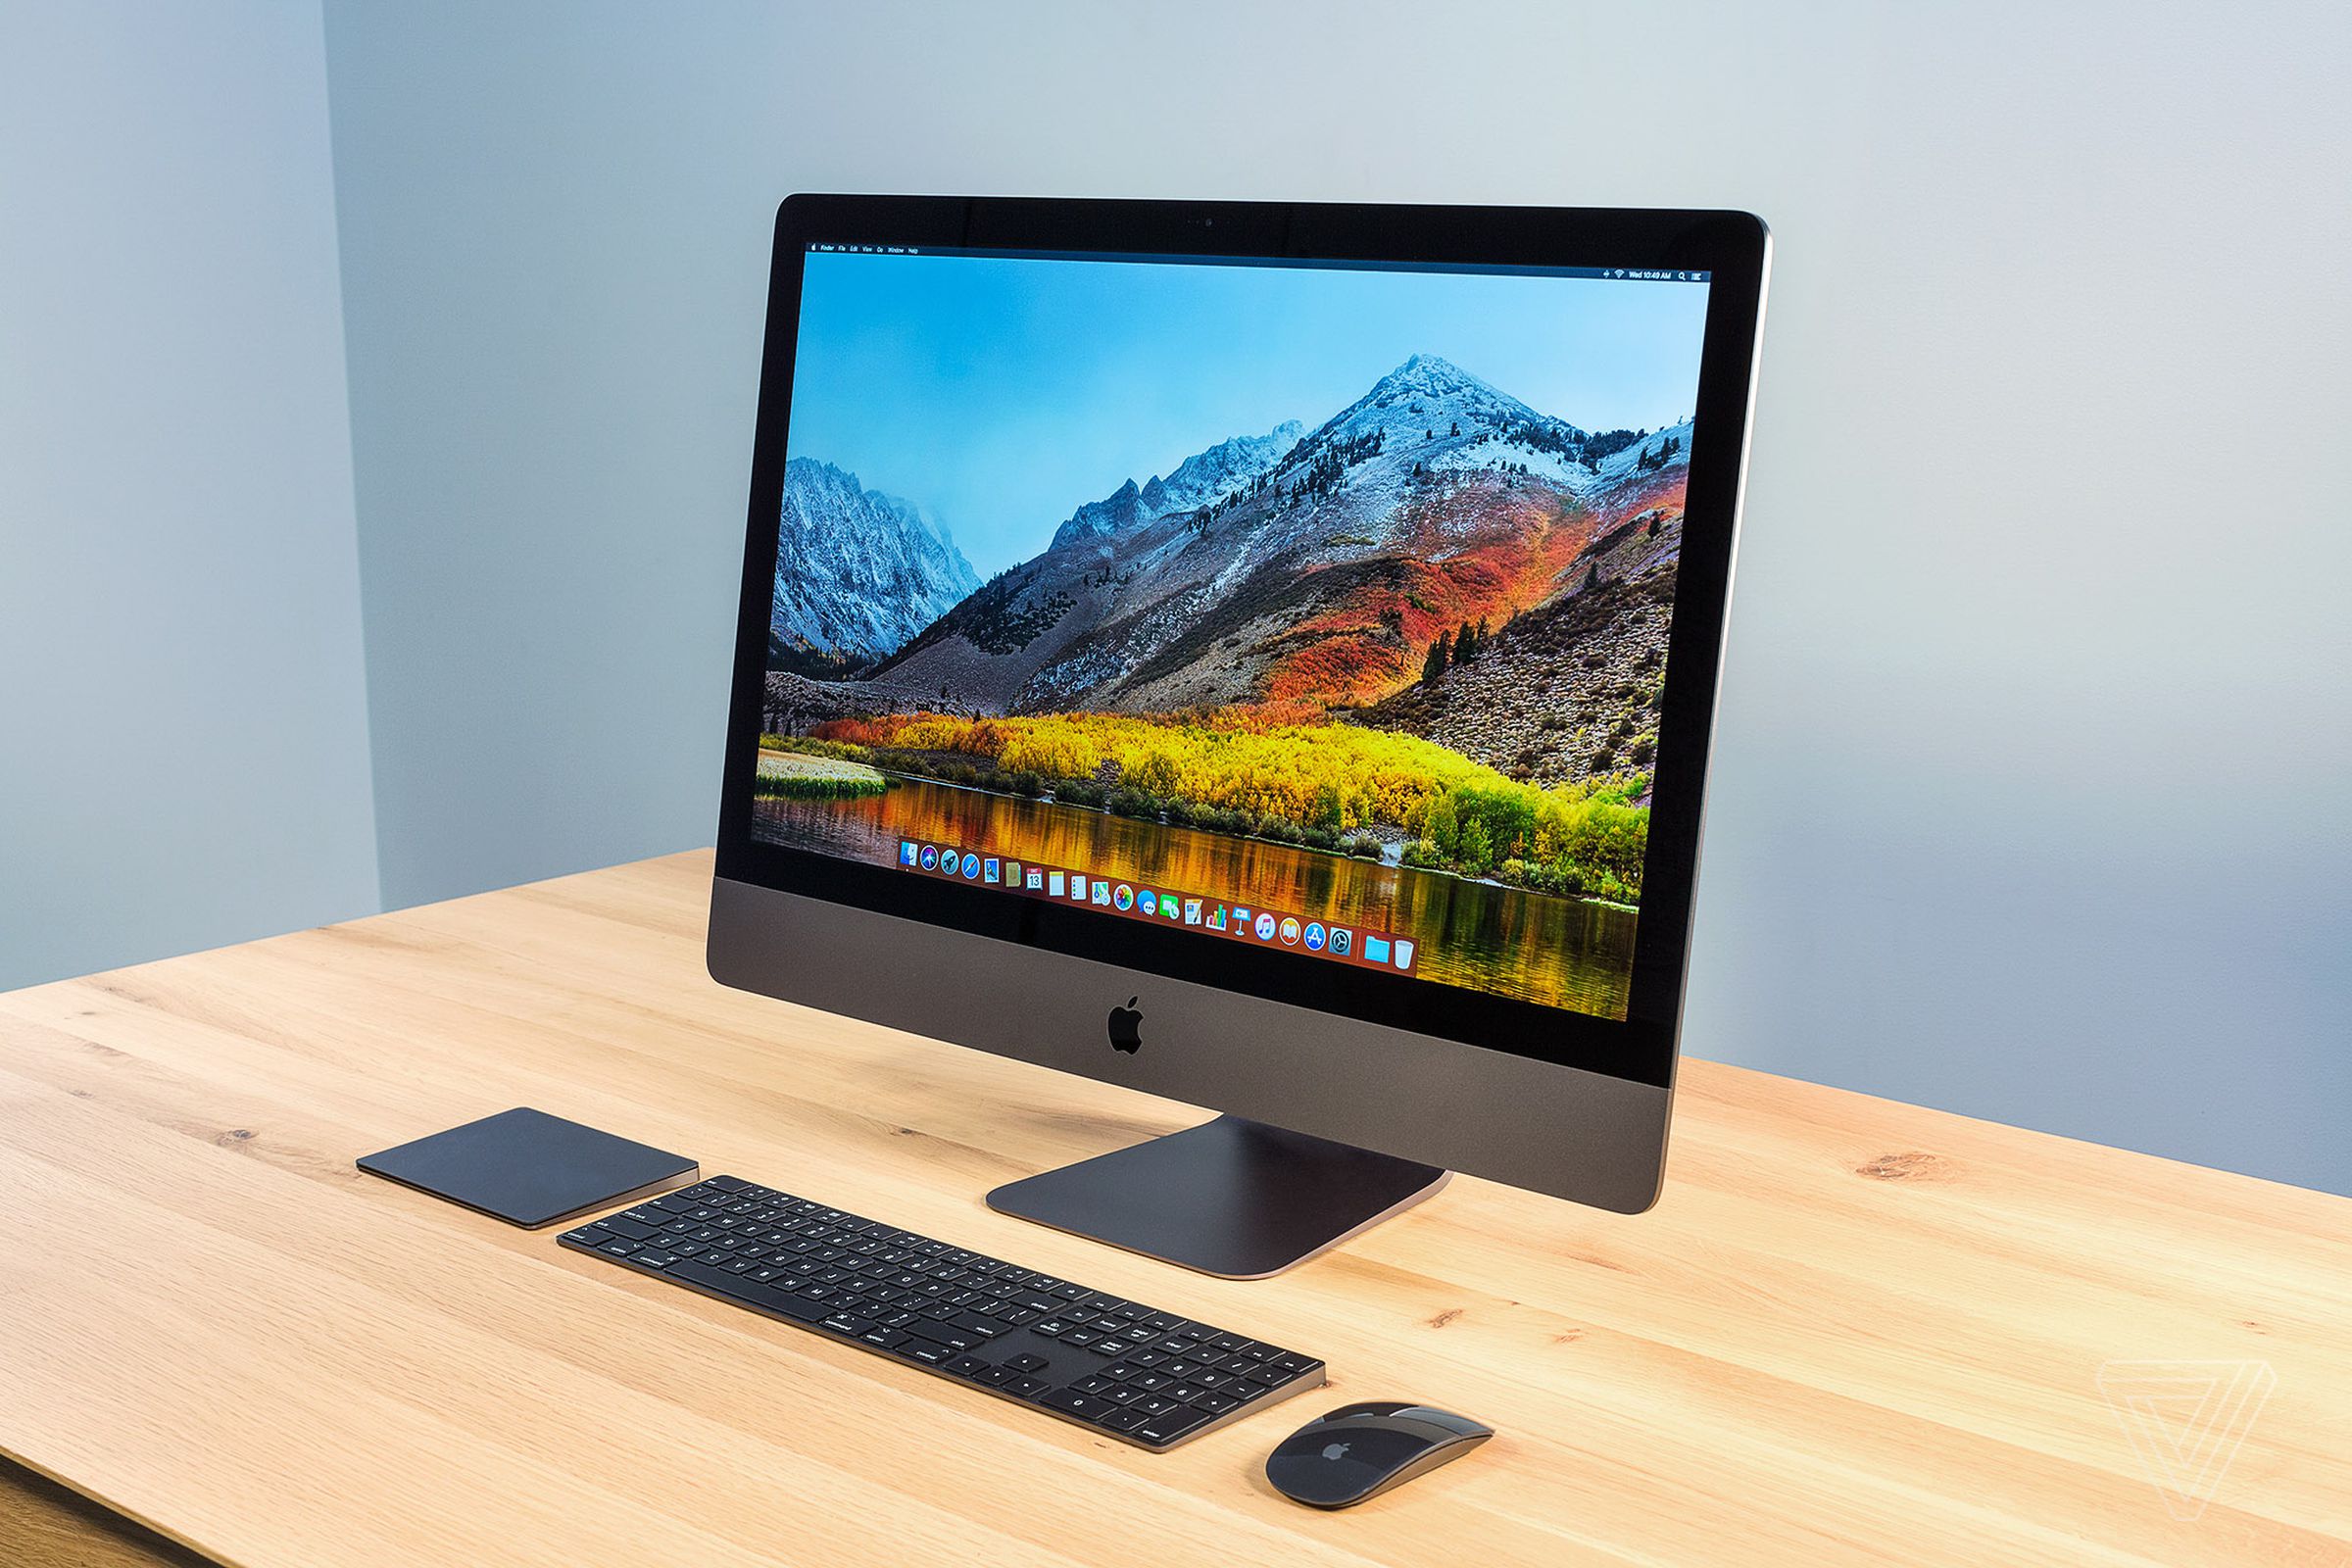 The iMac Pro was first introduced in 2017